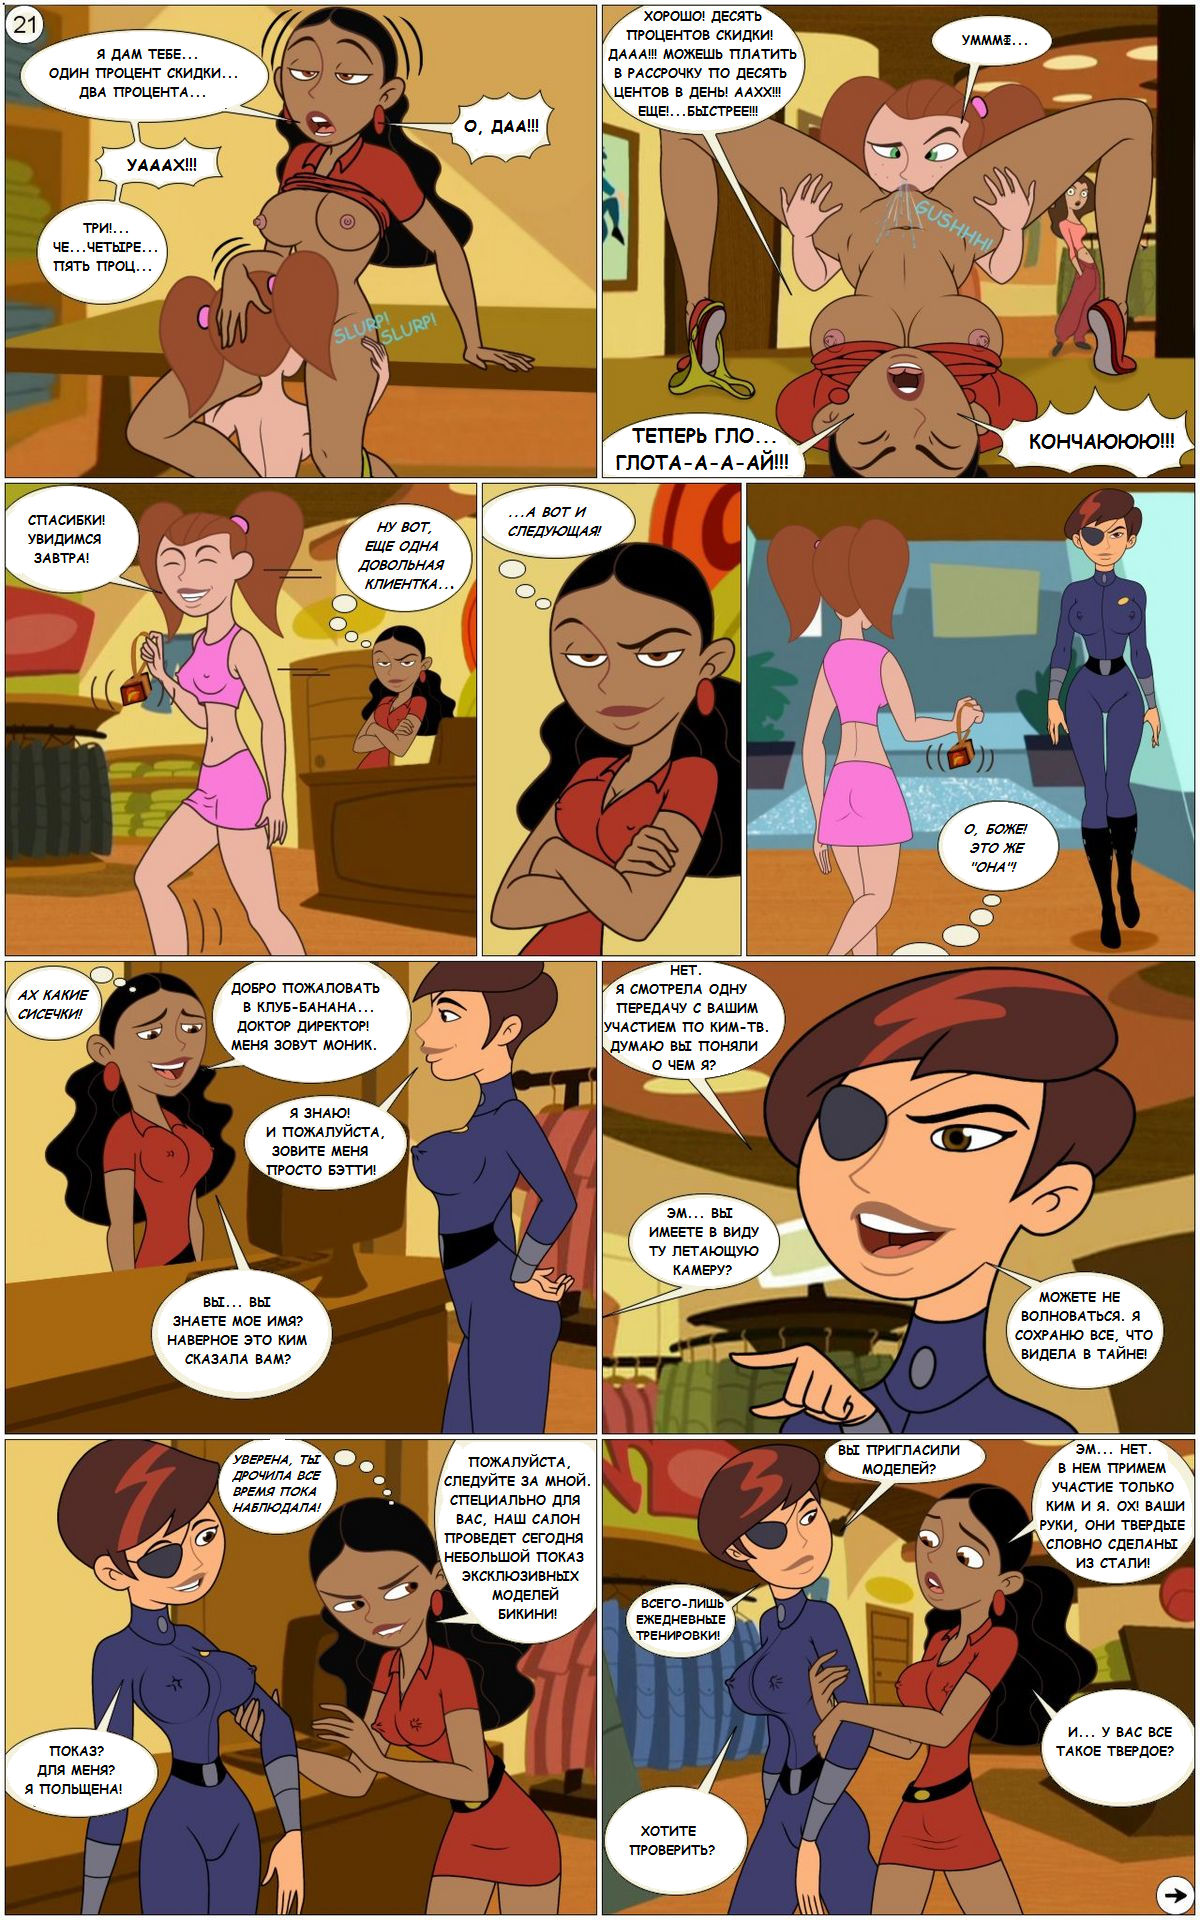 Read [gagala] Oh Betty Or How To Seduce A Female Secret Agent Kim Possible [russian